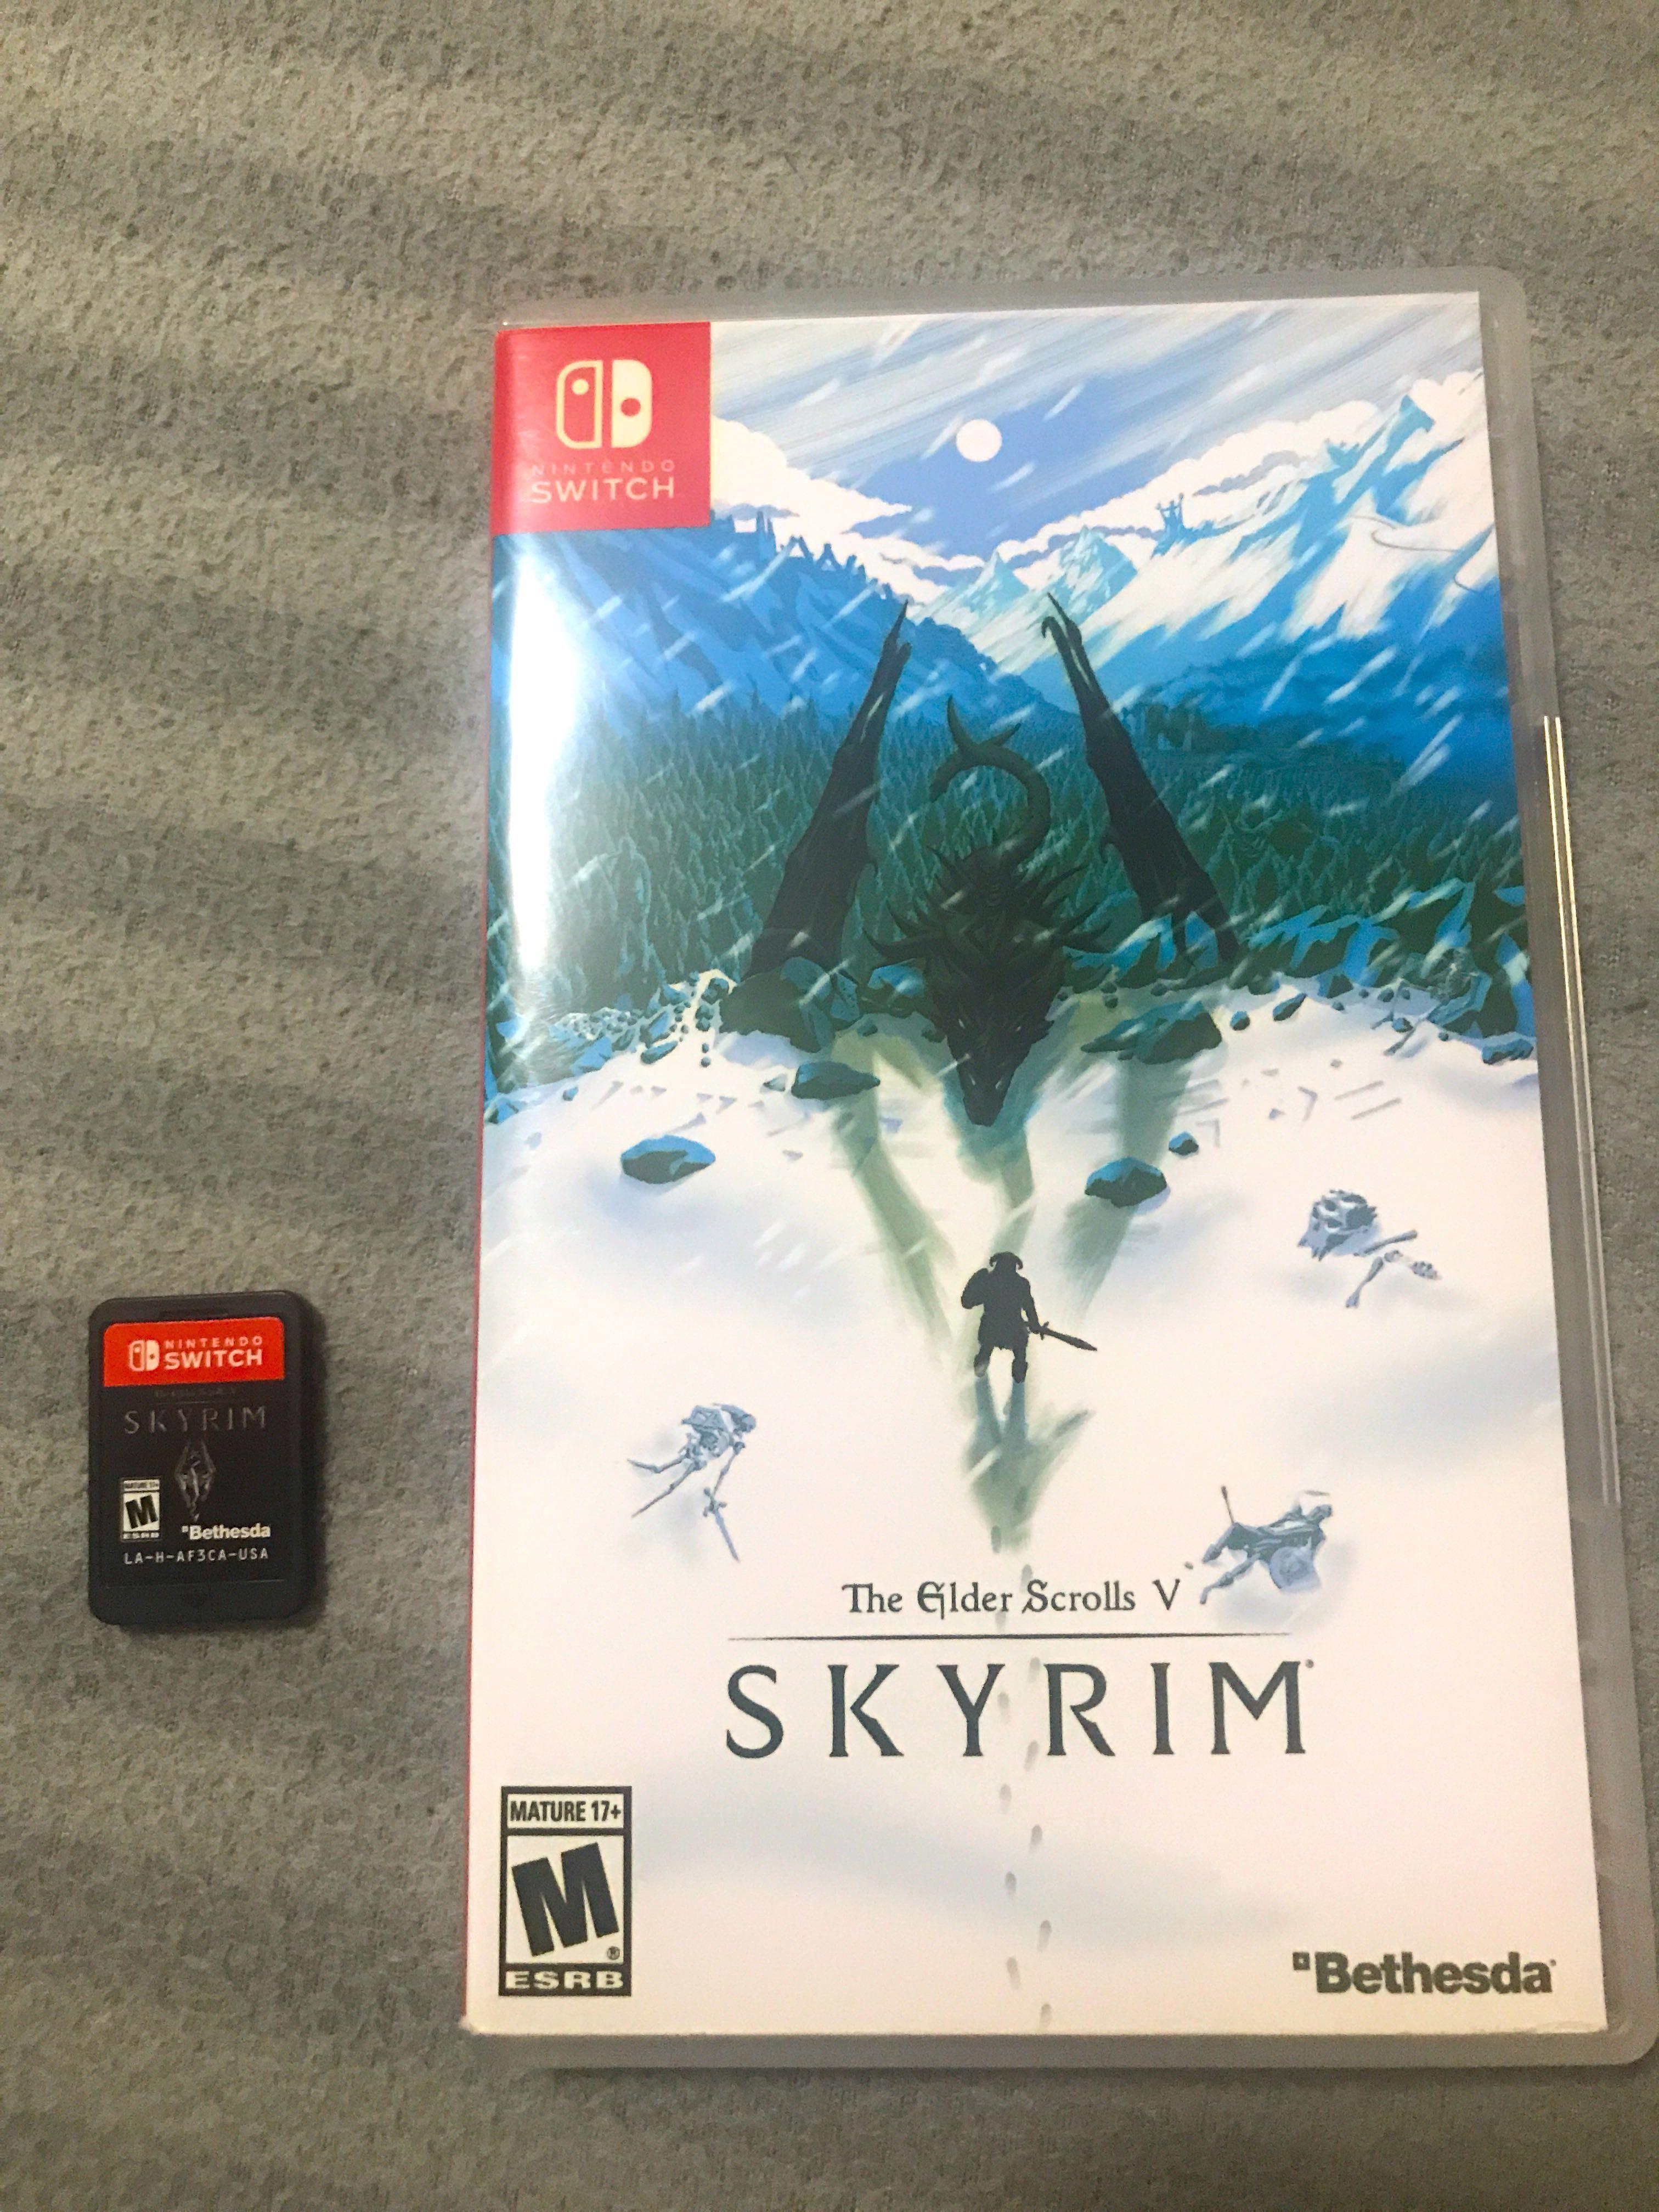 does skyrim on the switch come with dlc